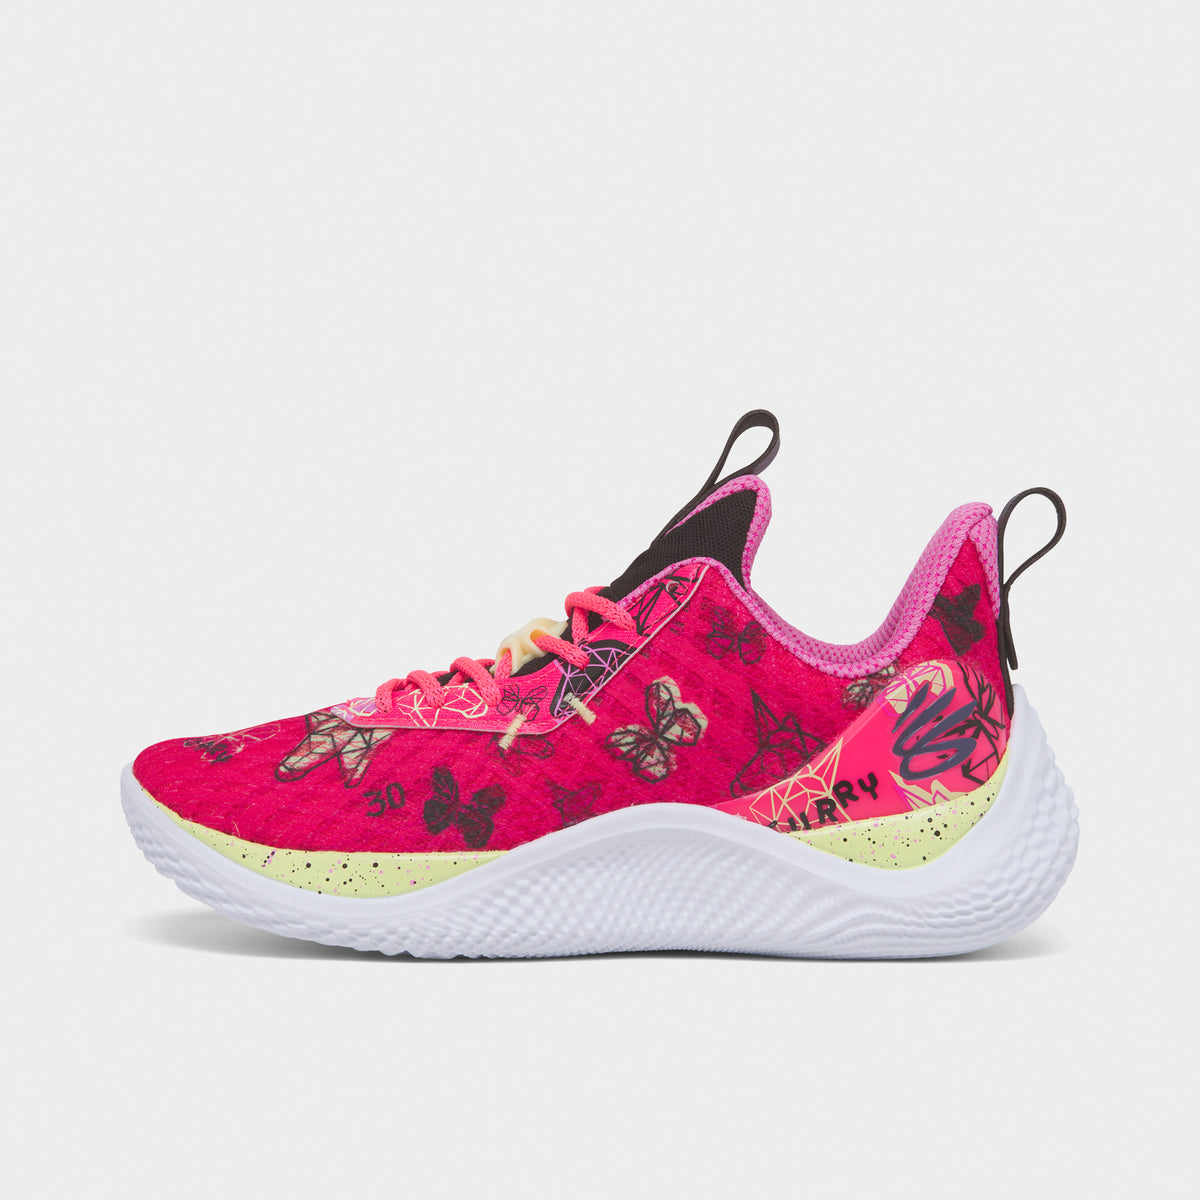 Under Armour Curry 10 GS Pink Shock / Black - Metallic Downpour Grey ...